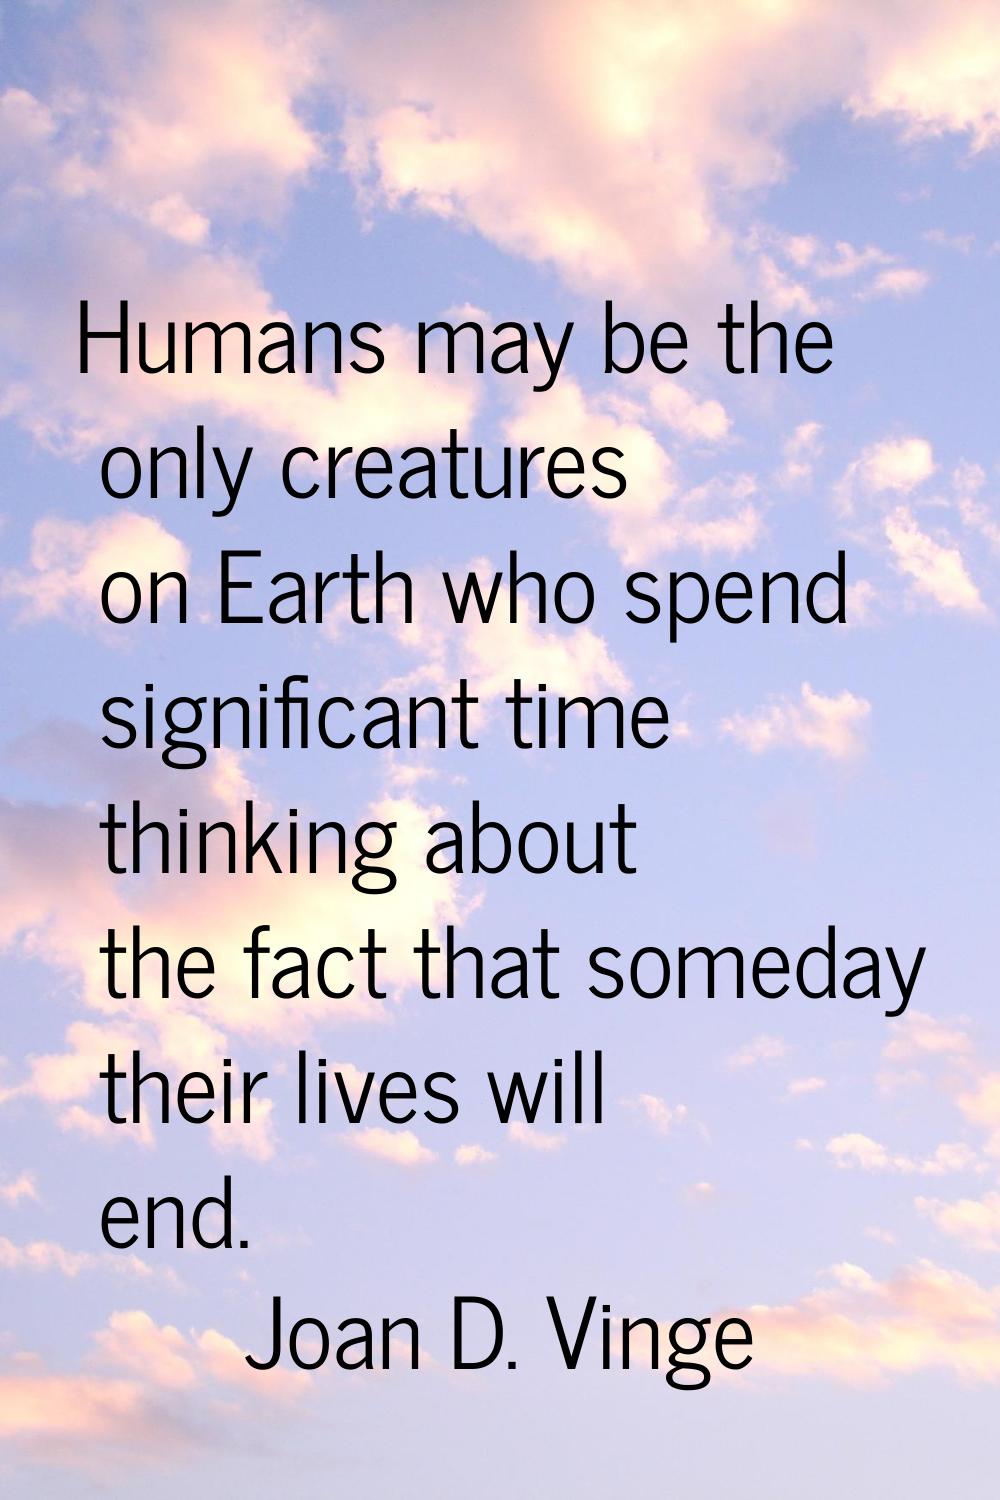 Humans may be the only creatures on Earth who spend significant time thinking about the fact that s